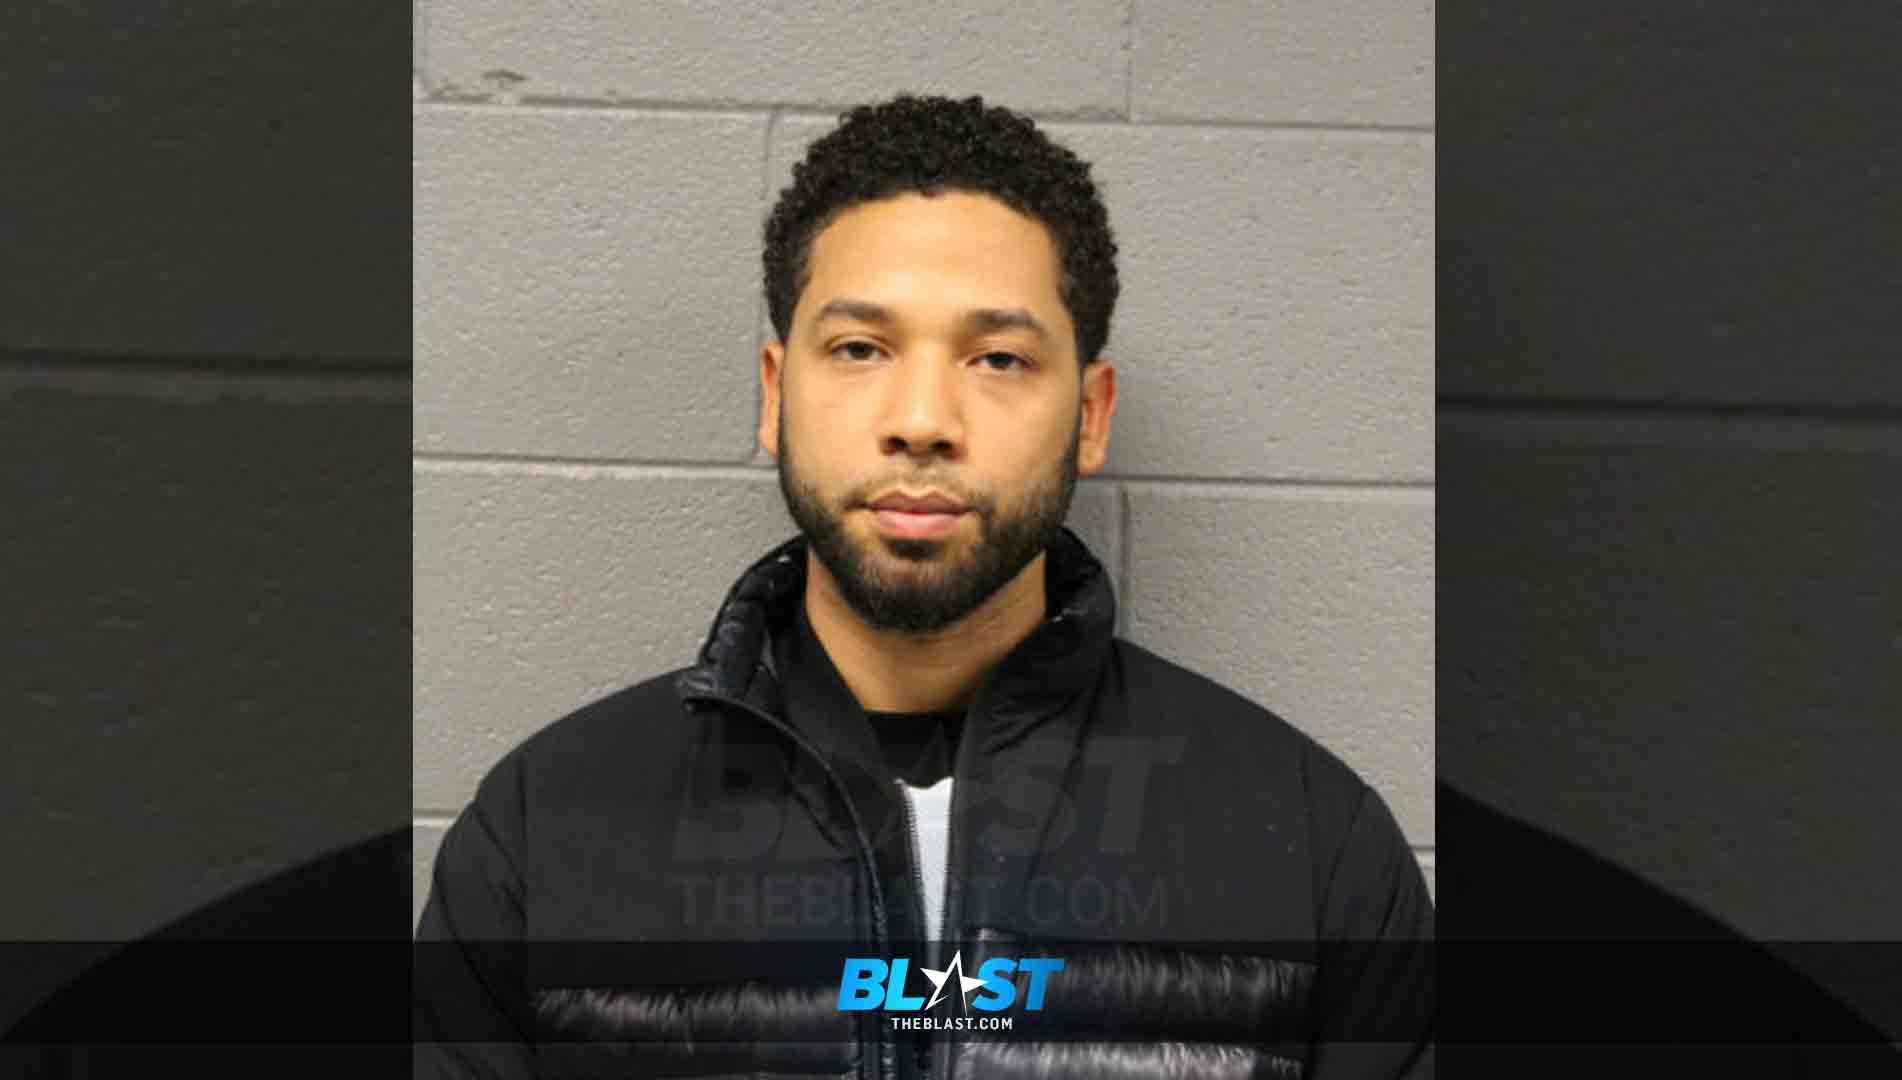 Jussie Smollett Facing 16 Felony Counts of Disorderly Conduct